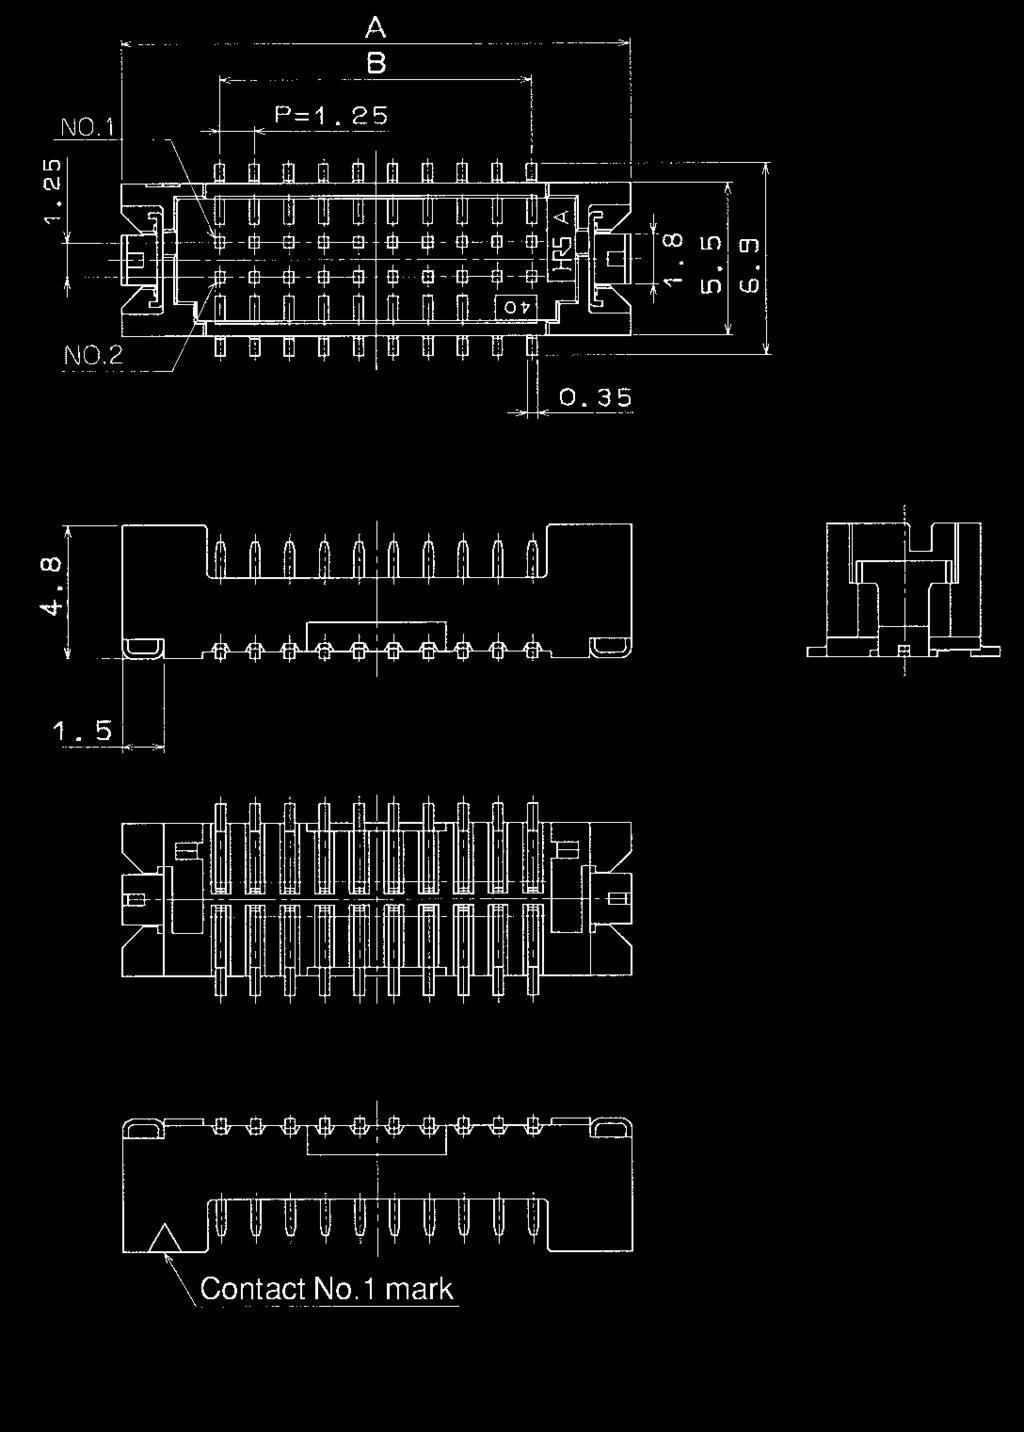 Double Row Straight Pin Header (SMT) (Four-Wall/Correspond to Vacuum Absorption) BPCB mounting pattern Note 1.